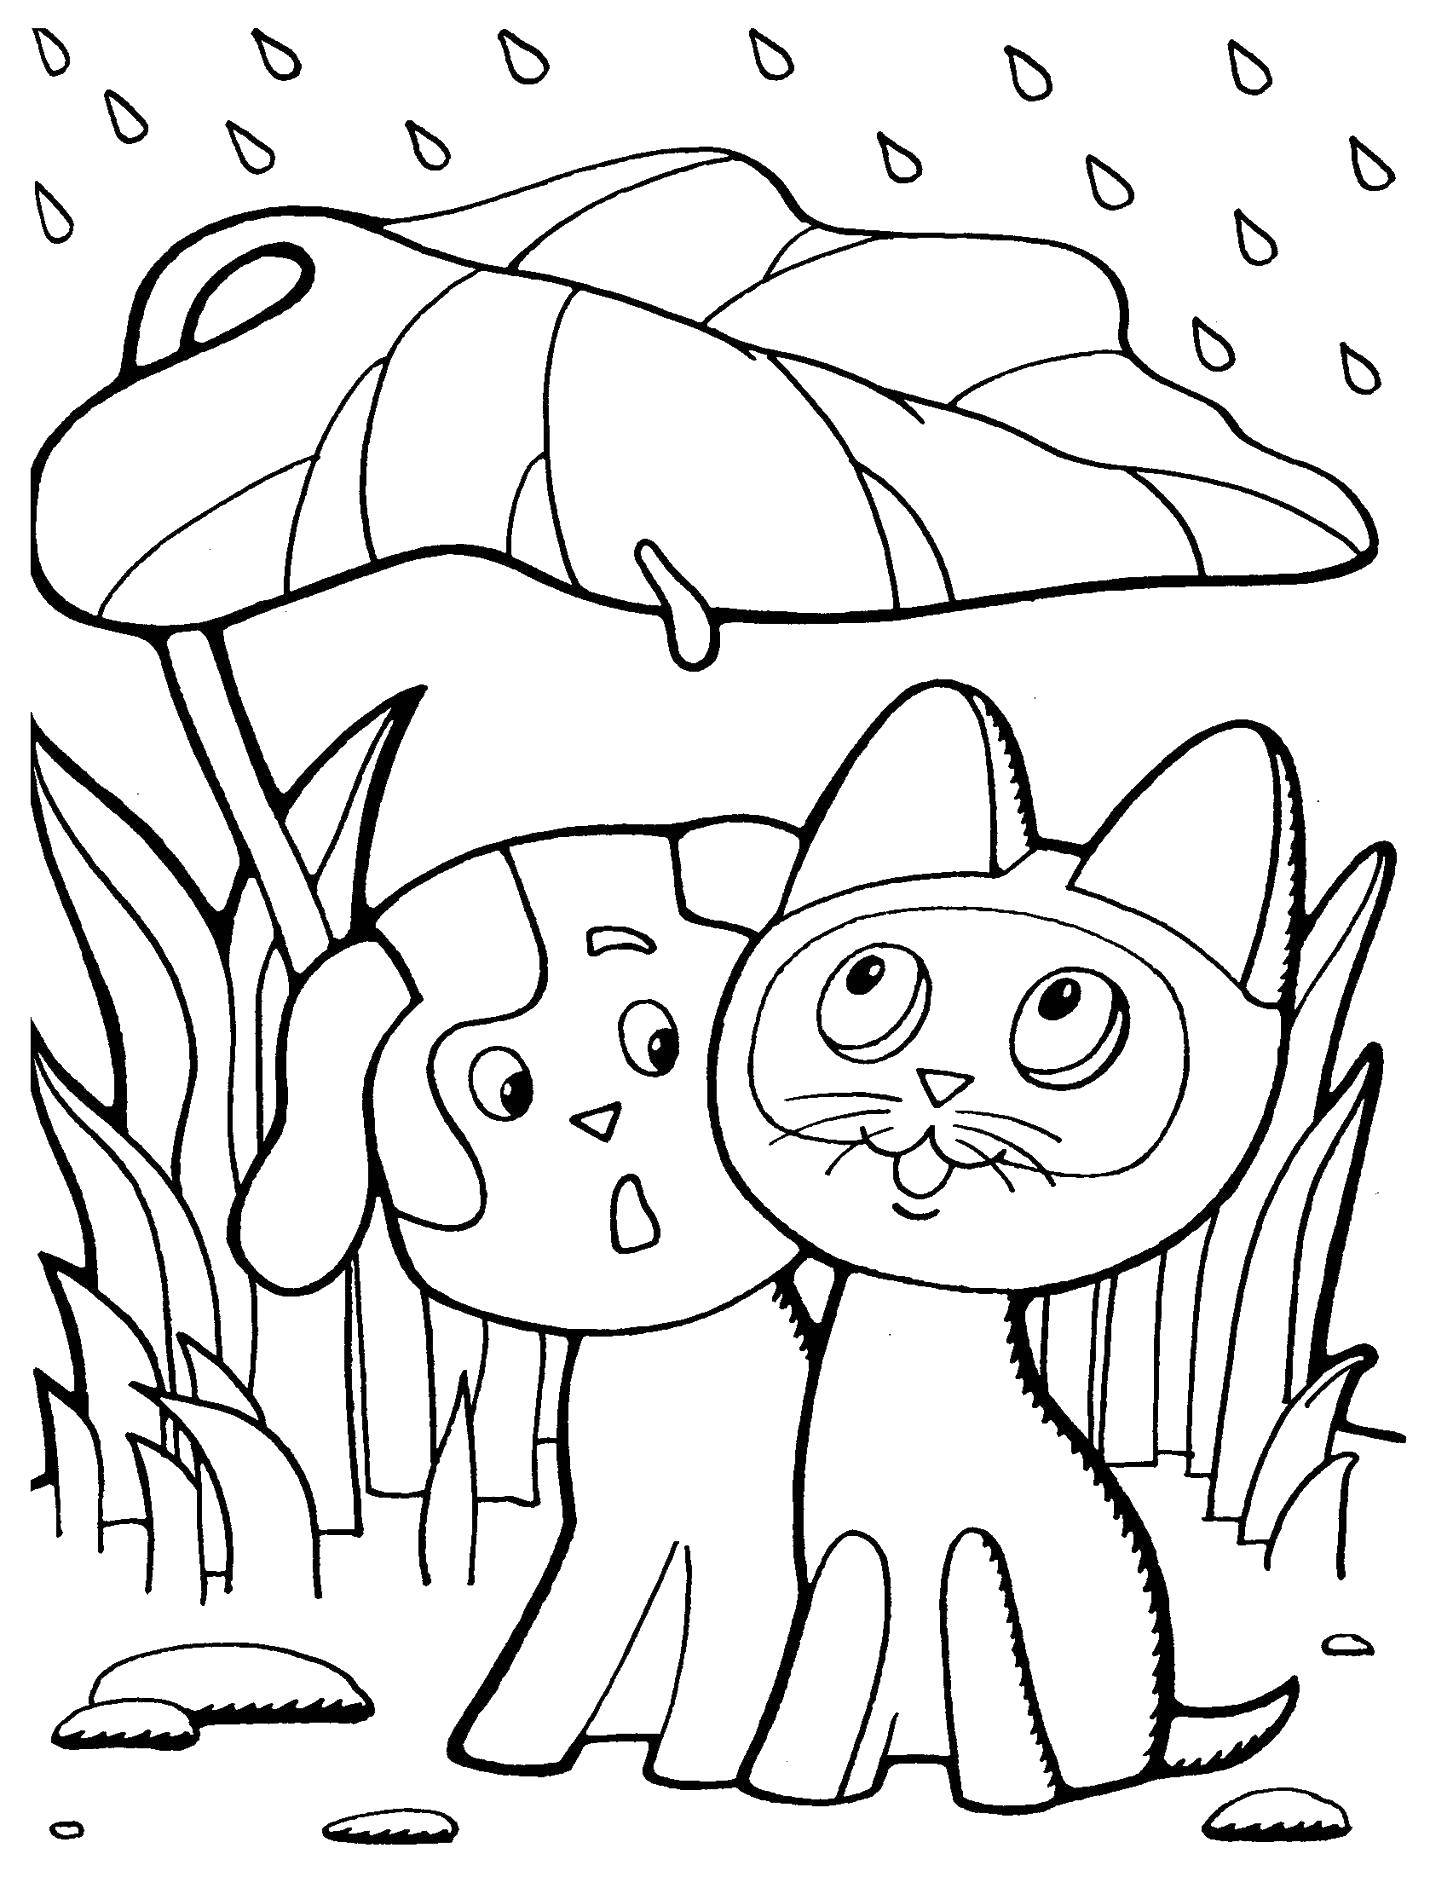 Coloring Kitten named woof and the puppy hid under a leaf. Category Fairy tales. Tags:  Tales, "Kitten named woof".